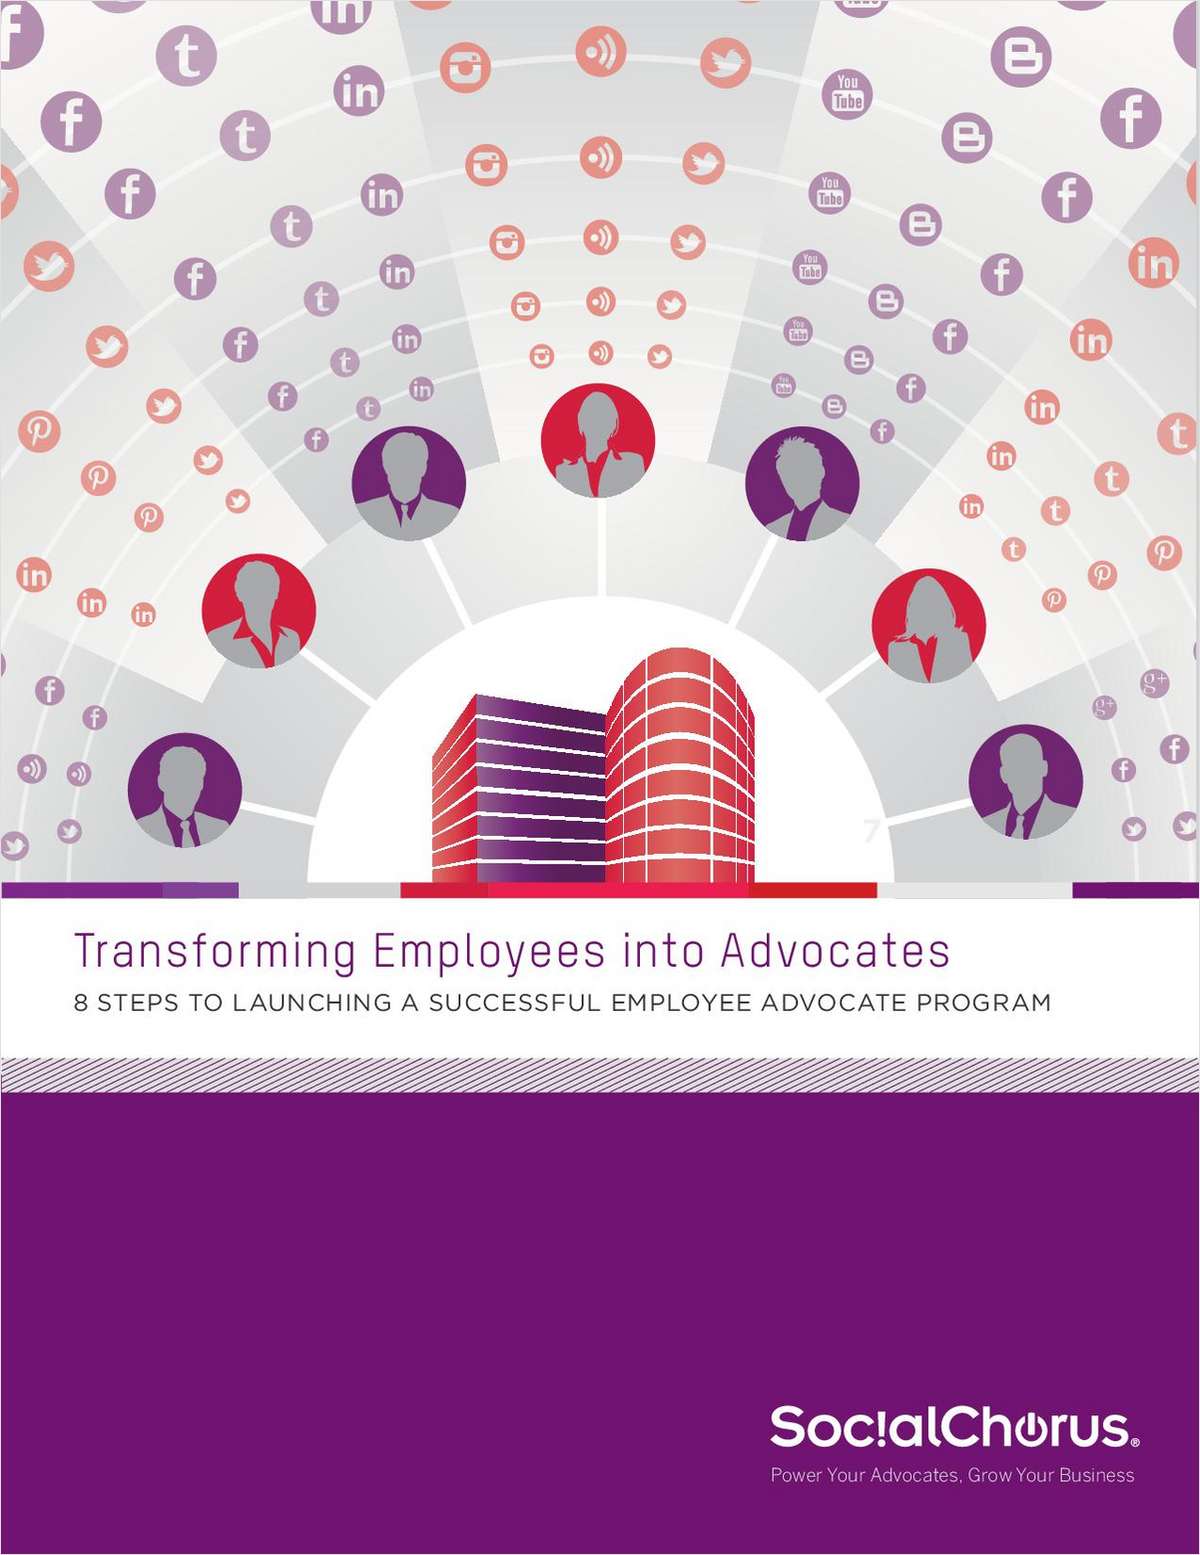 8 Steps to Launching a Successful Employee Advocate Program